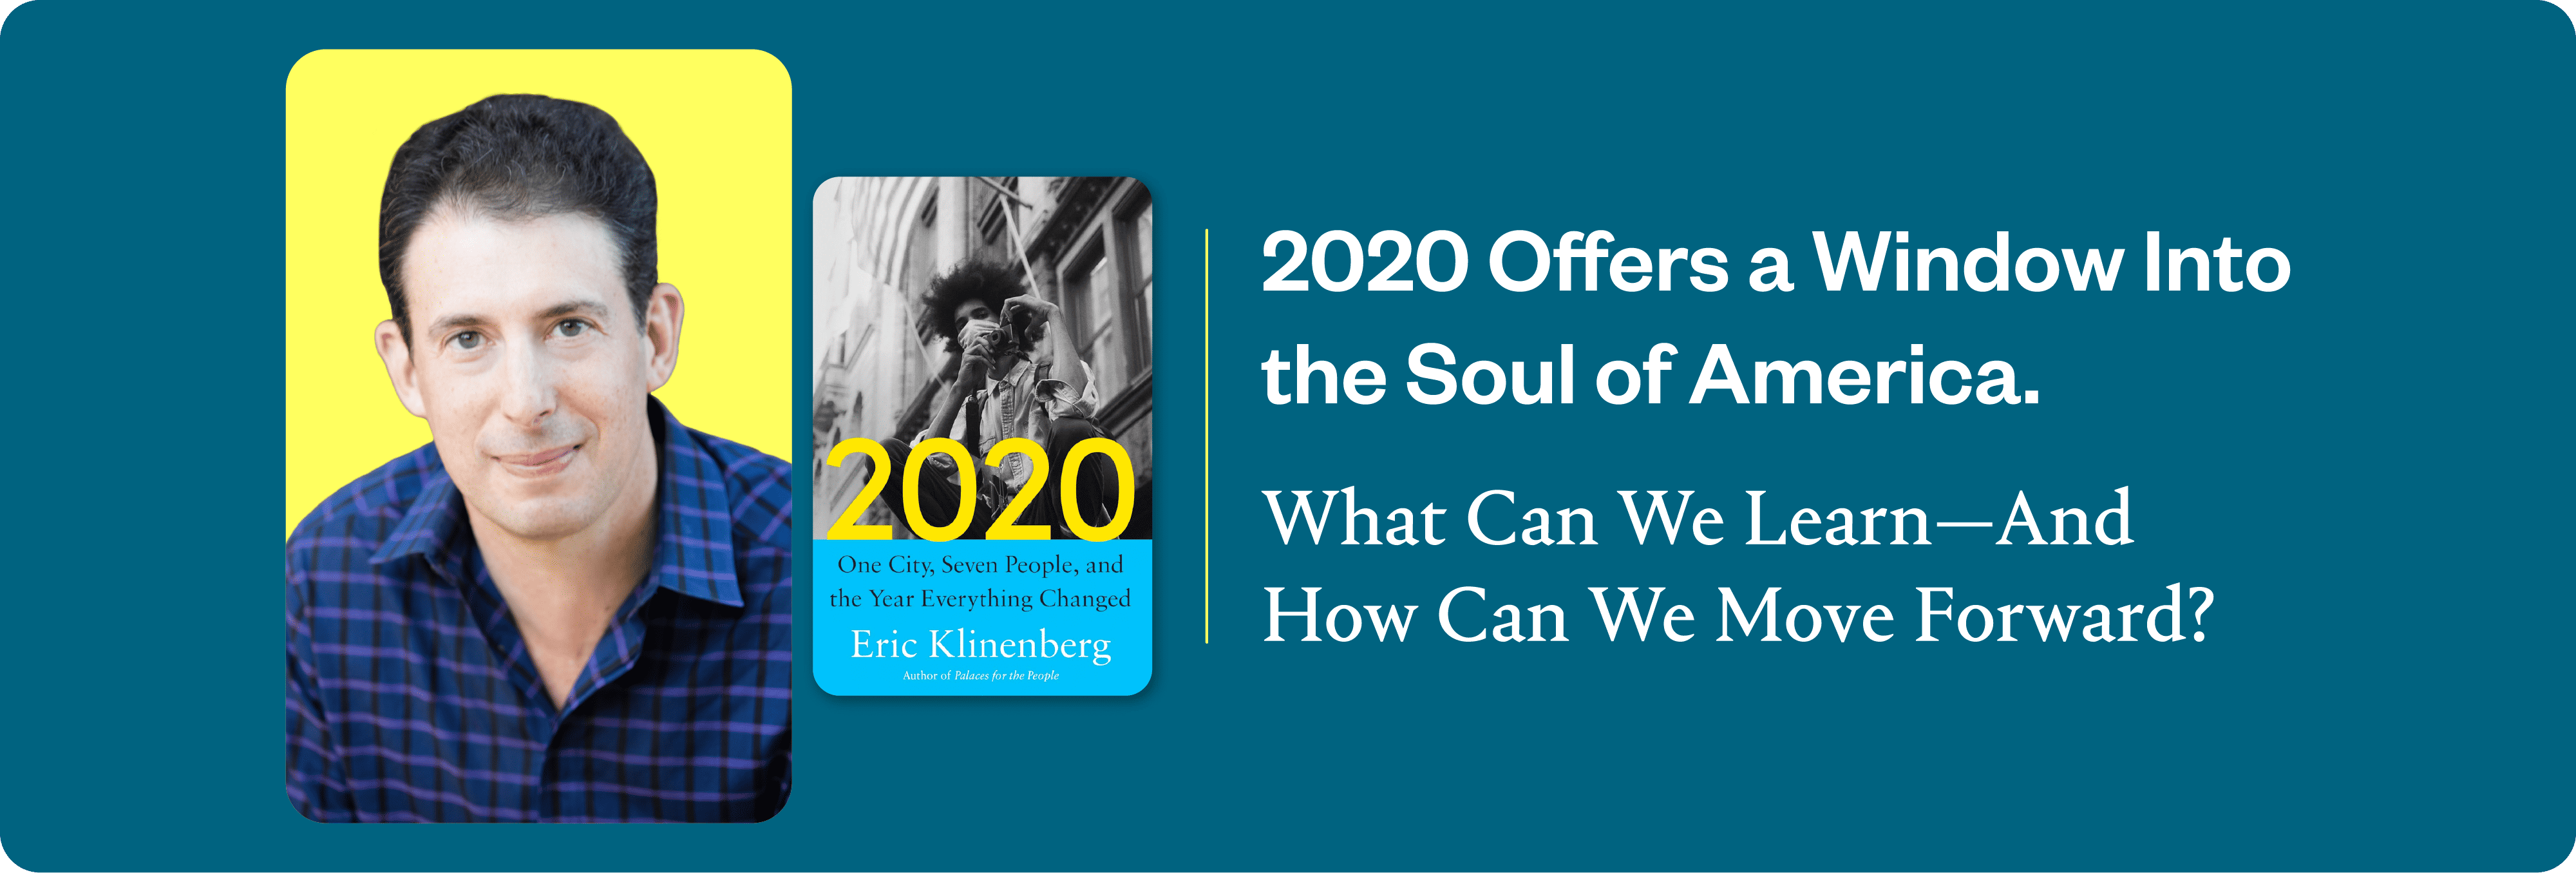 2020 Revealed the Soul of Our Democracy. Sociologist Eric Klinenberg’s New Book Shows Us How to Heal